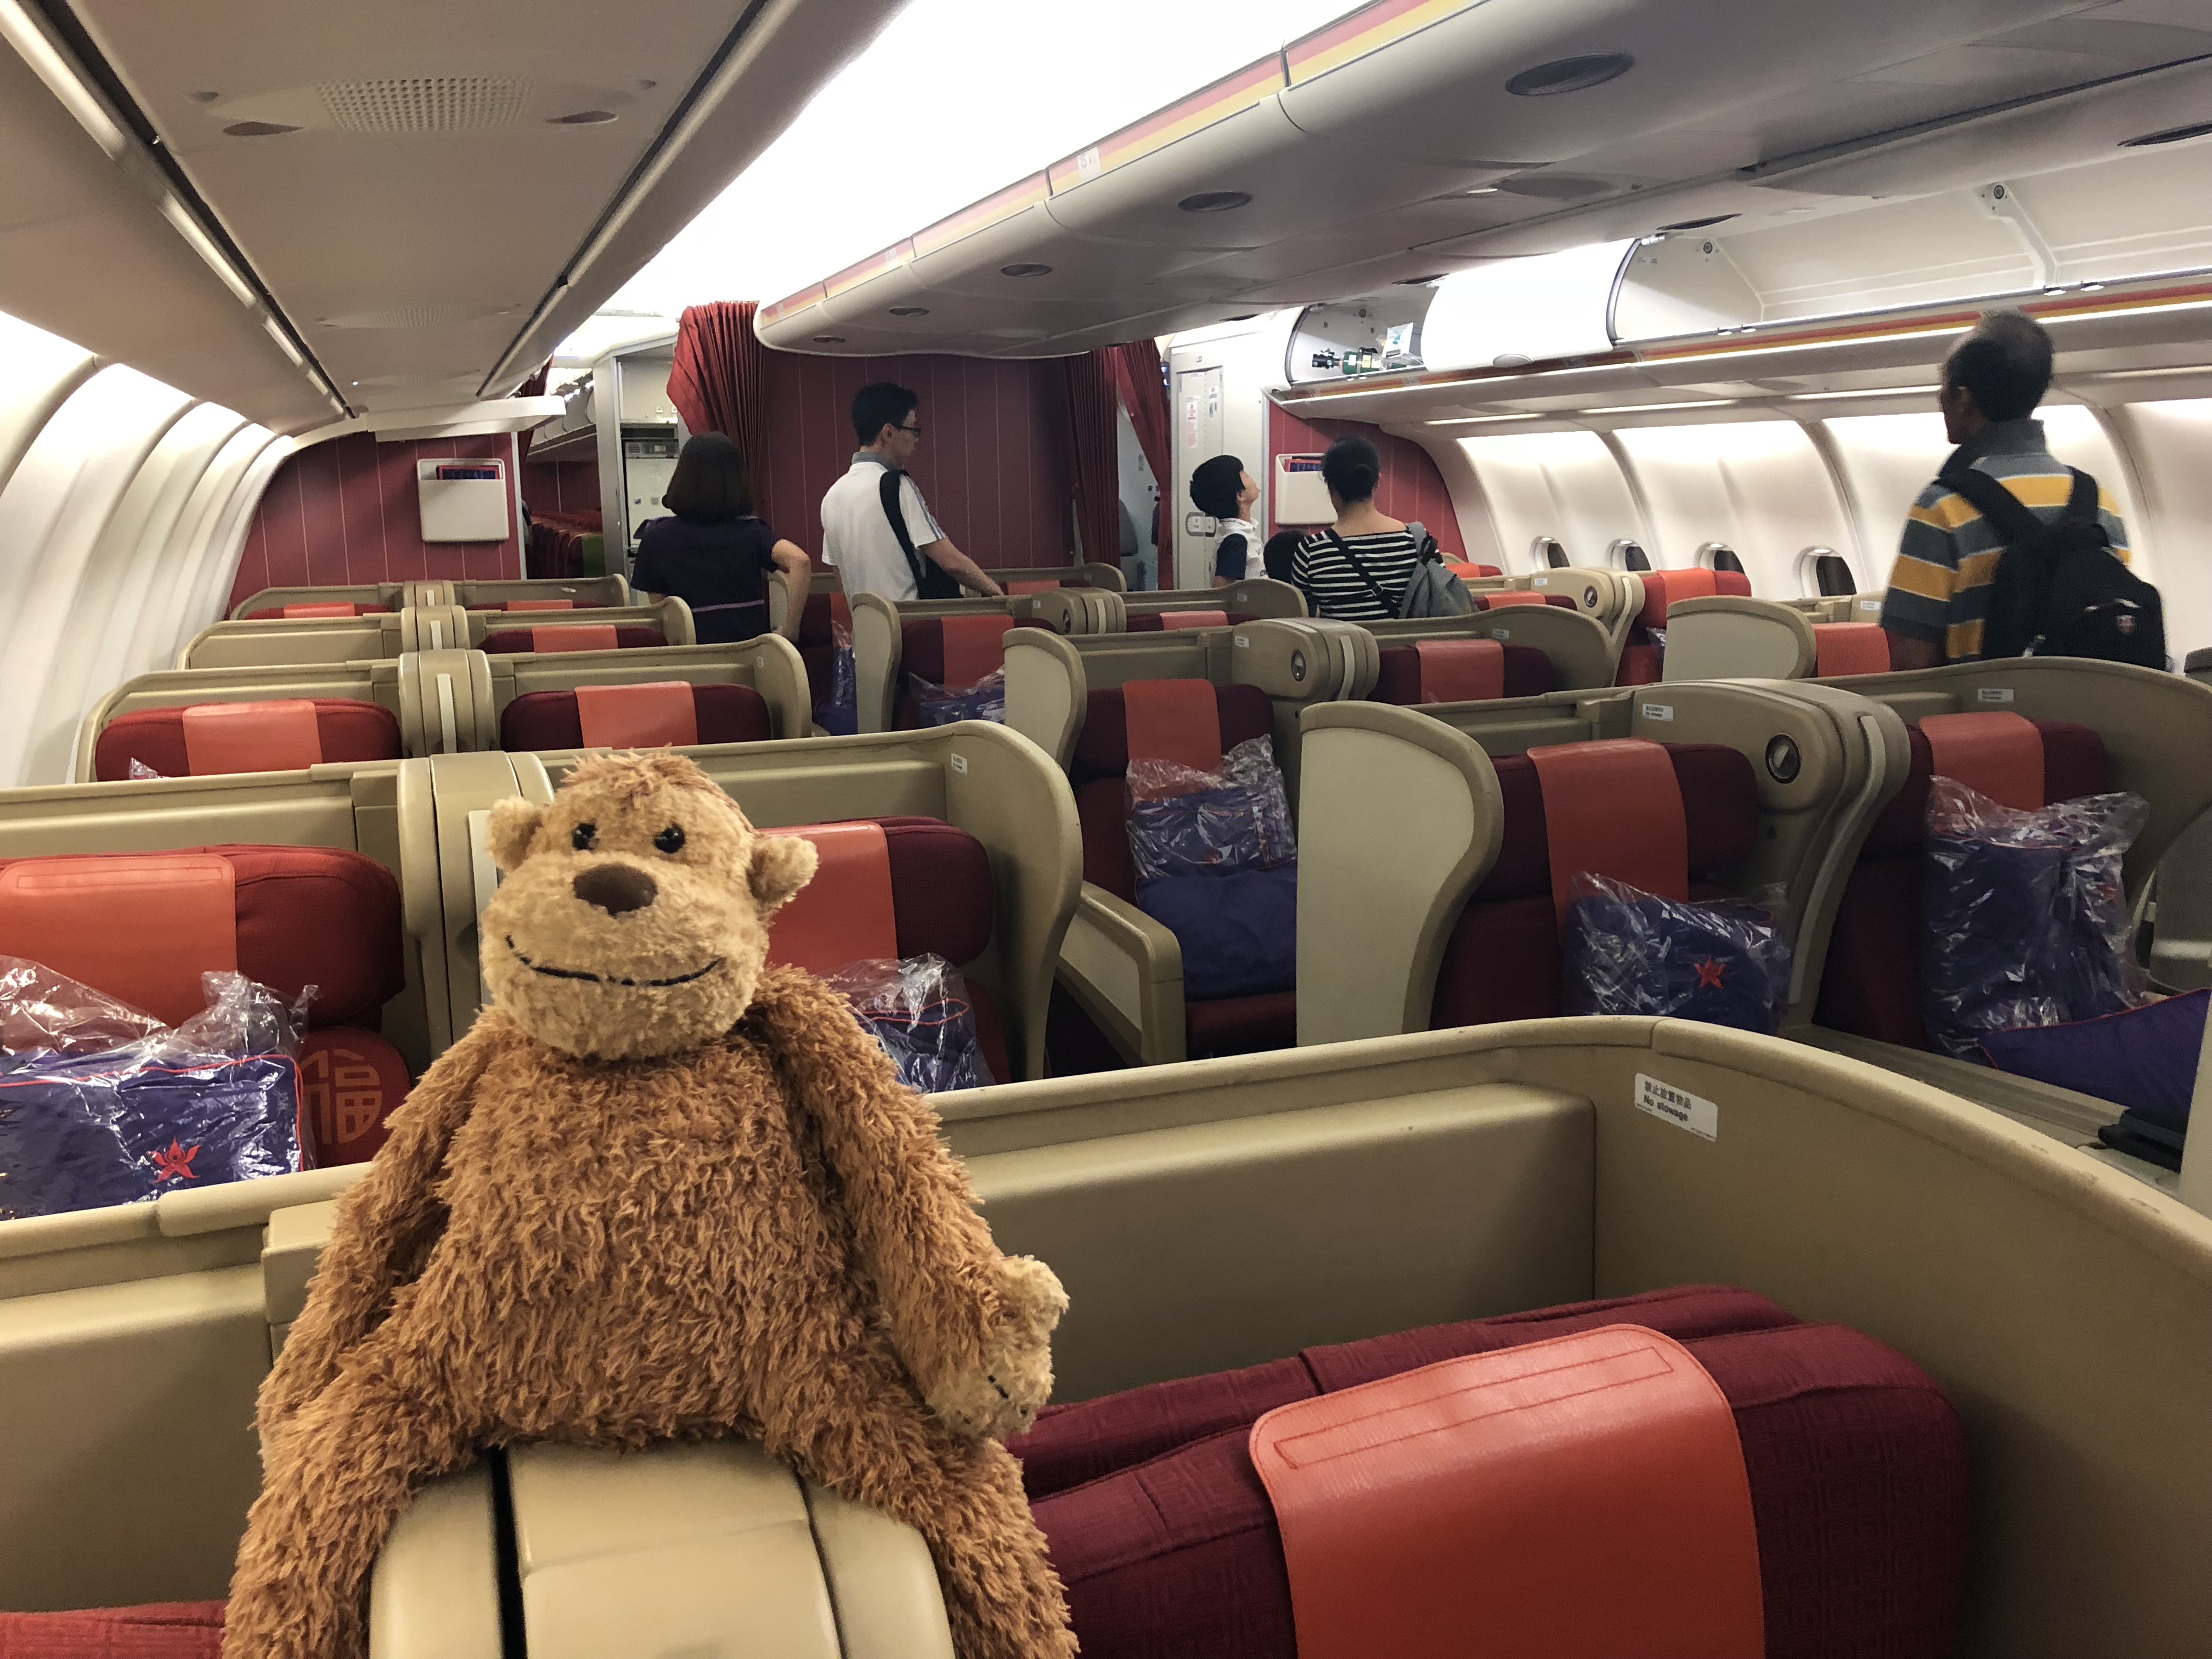 a stuffed monkey sitting on a seat in an airplane